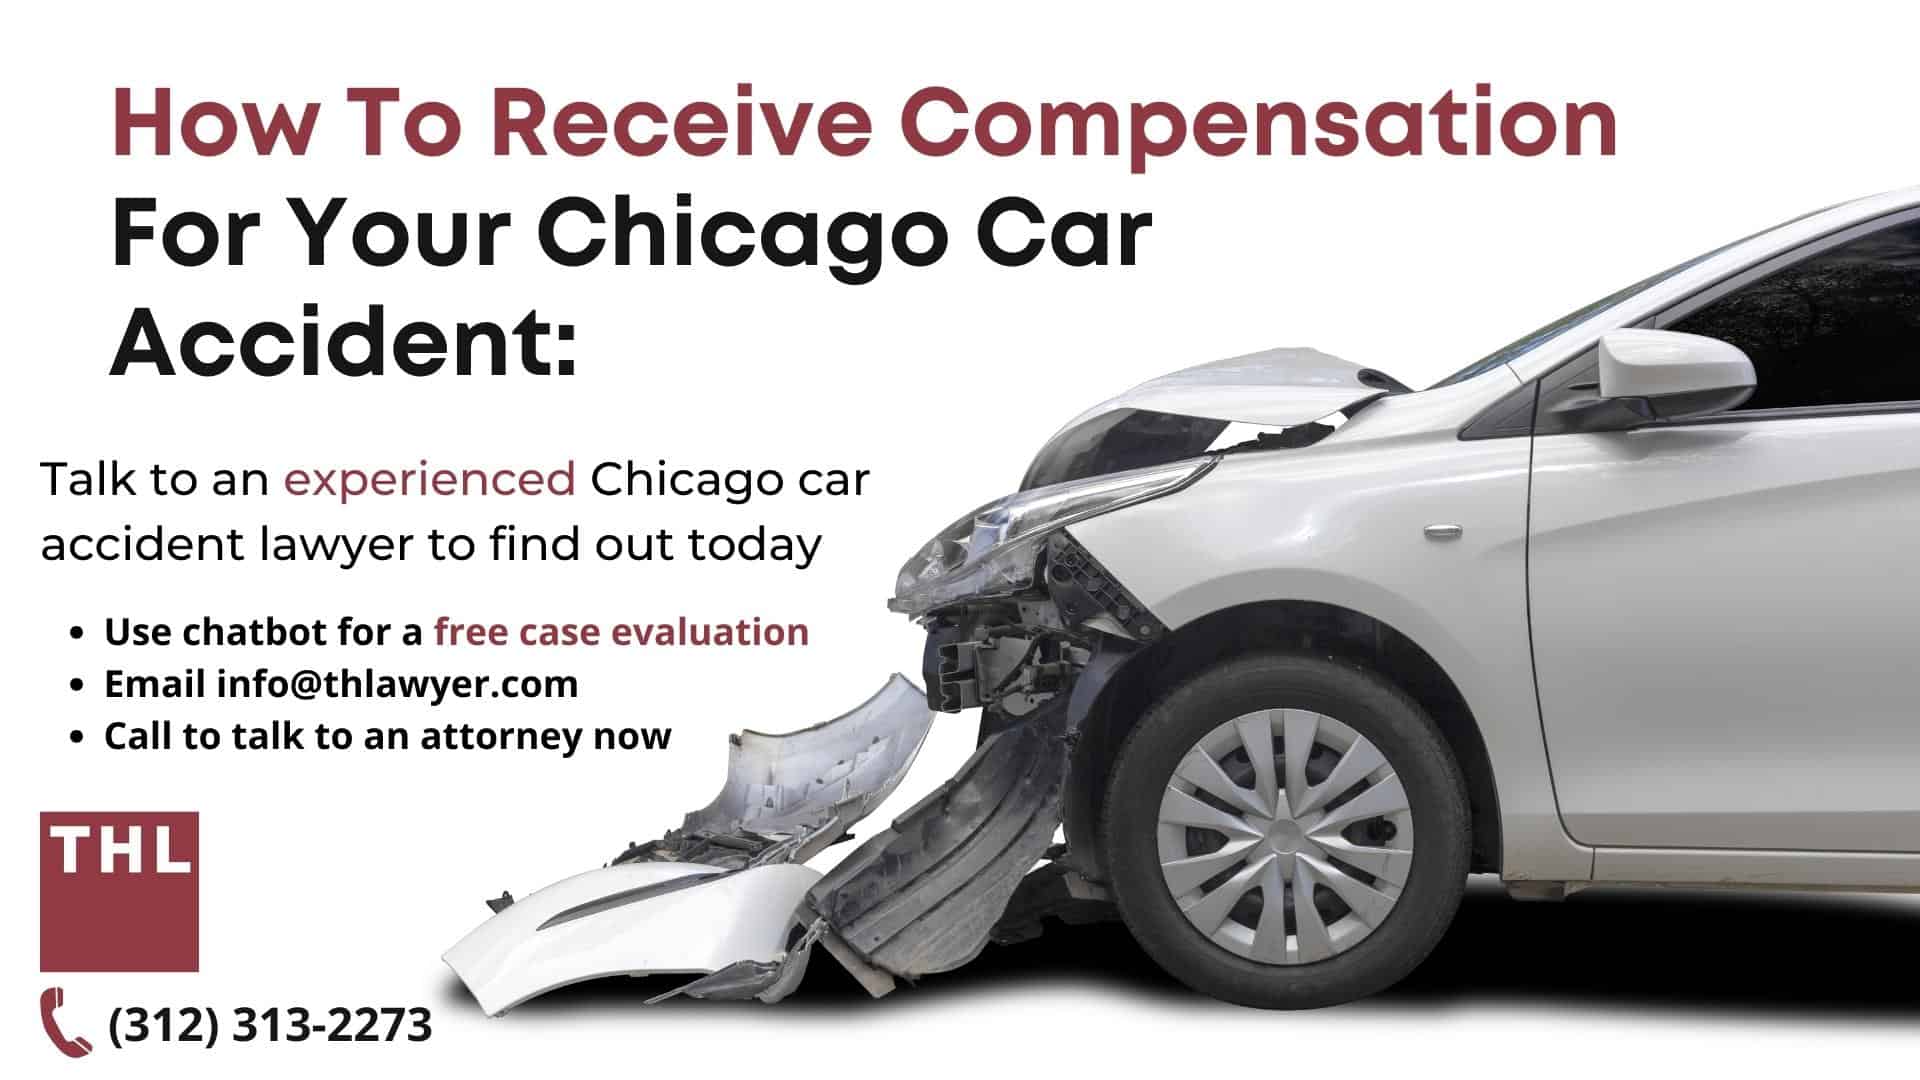 Receiving Fair Compensation for your Chicago Car Accident | Chicago Personal Injury Compensation | Experienced Car Accident Lawyer in Chicago IL Illinois